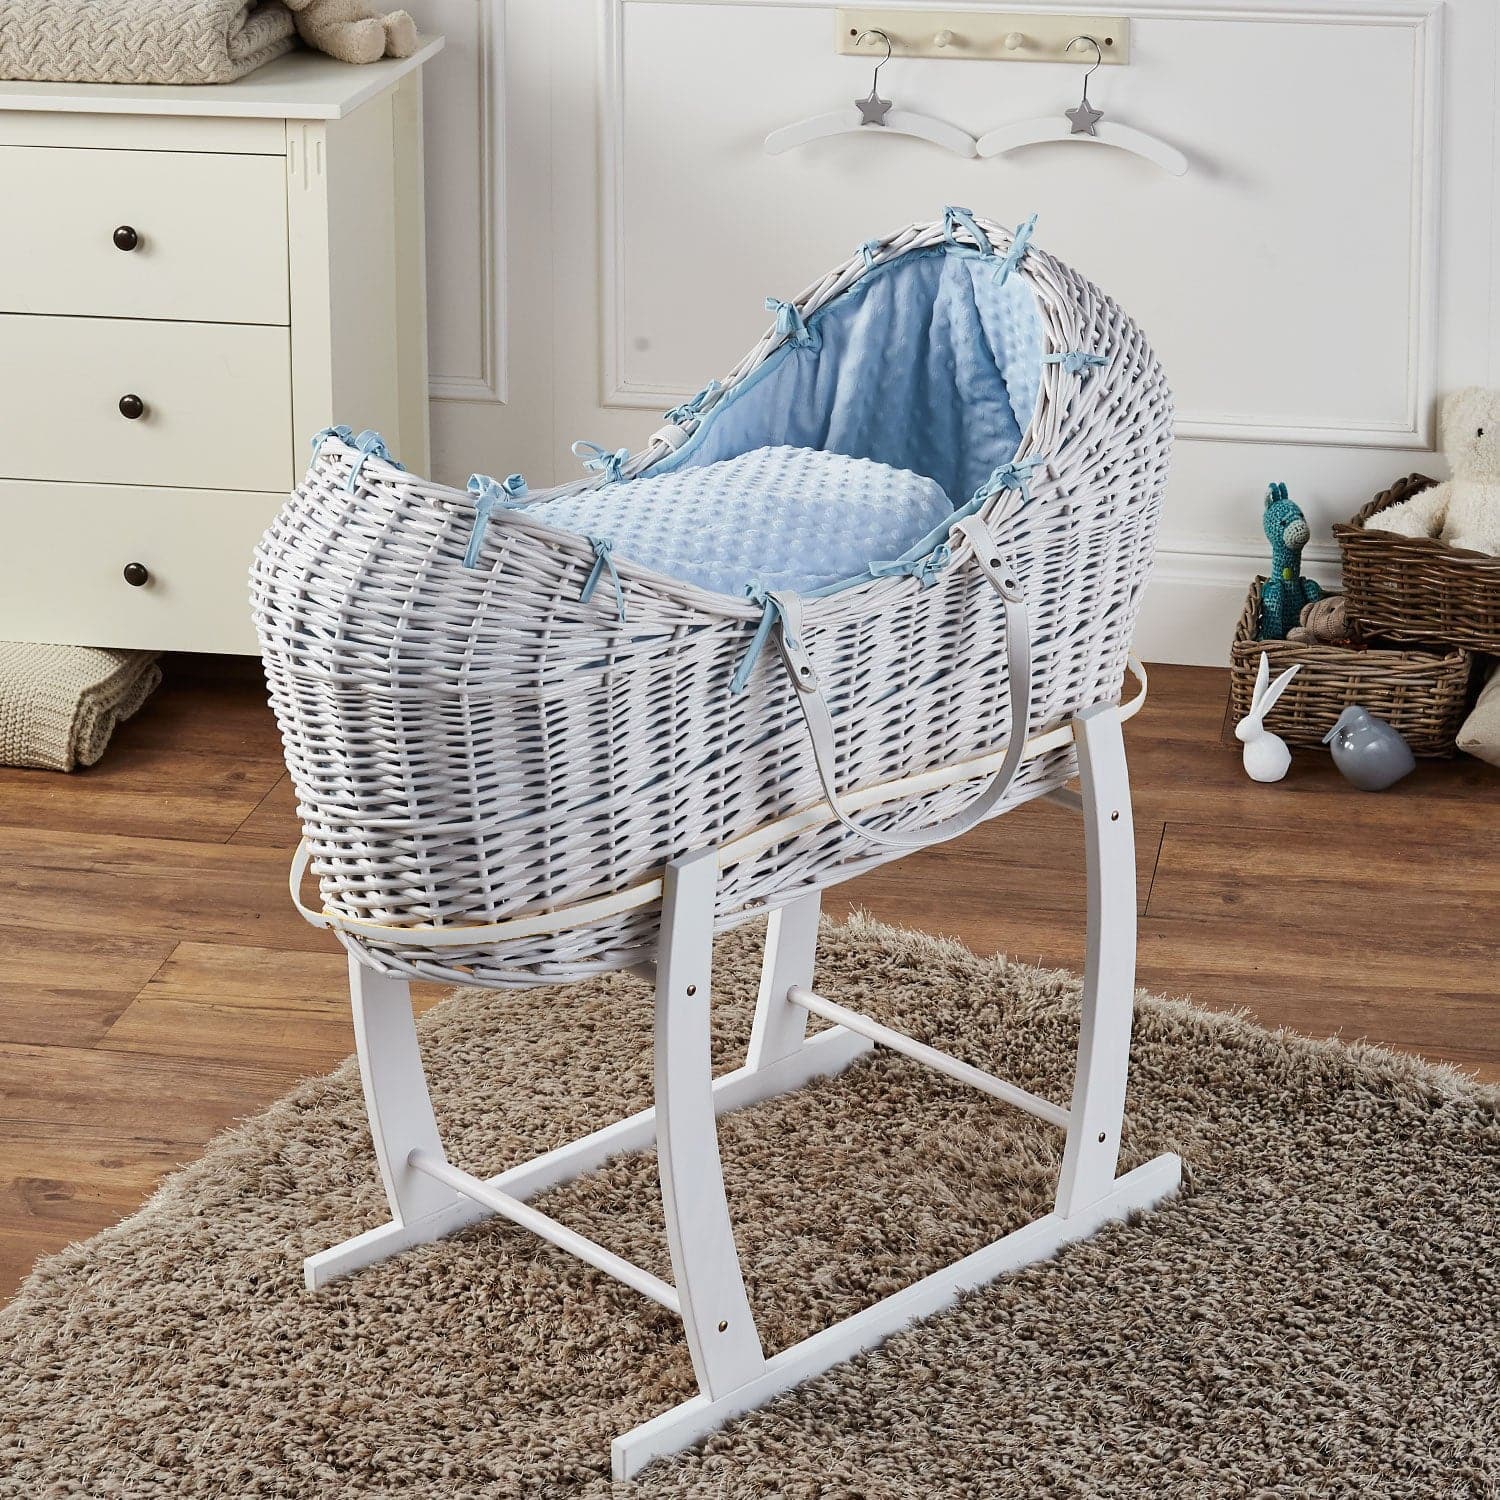 Wicker Deluxe Pod Baby Moses Basket With Stand White Dimple Blue